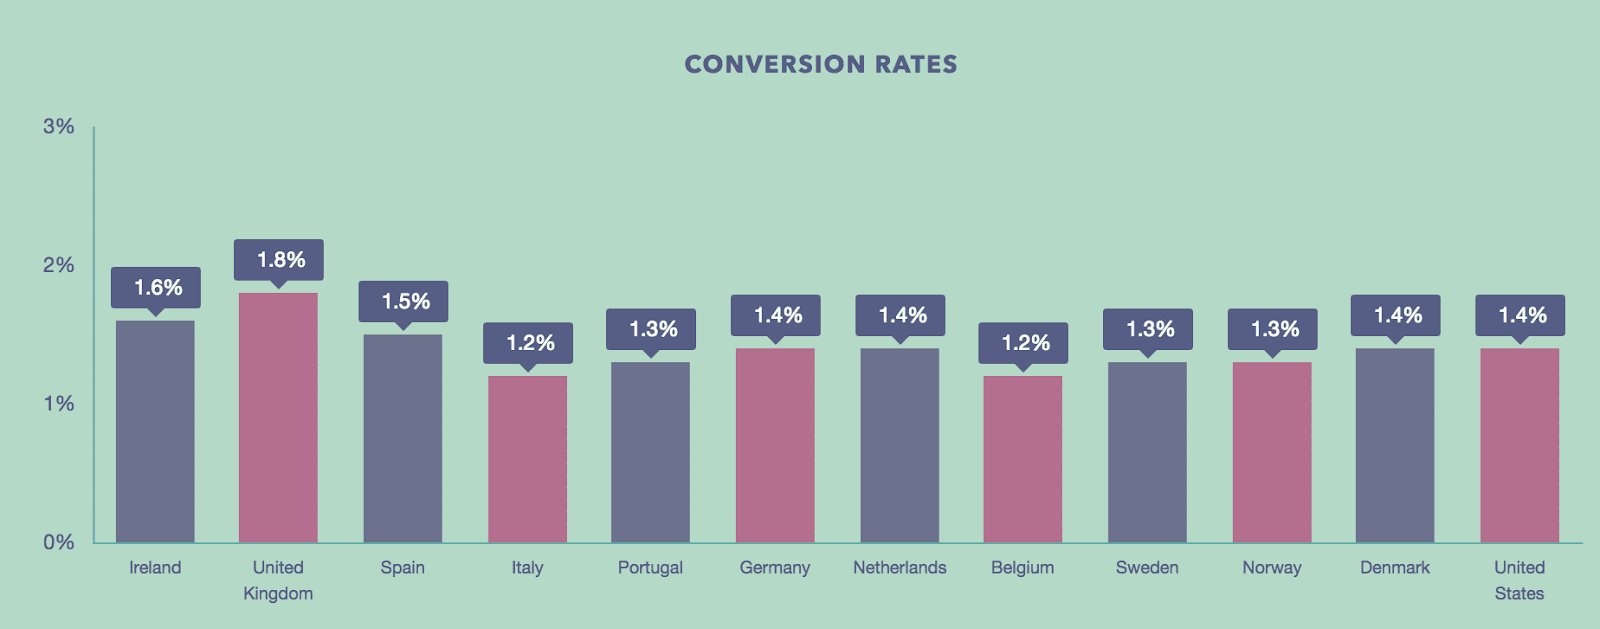 Conversion Rates With Time